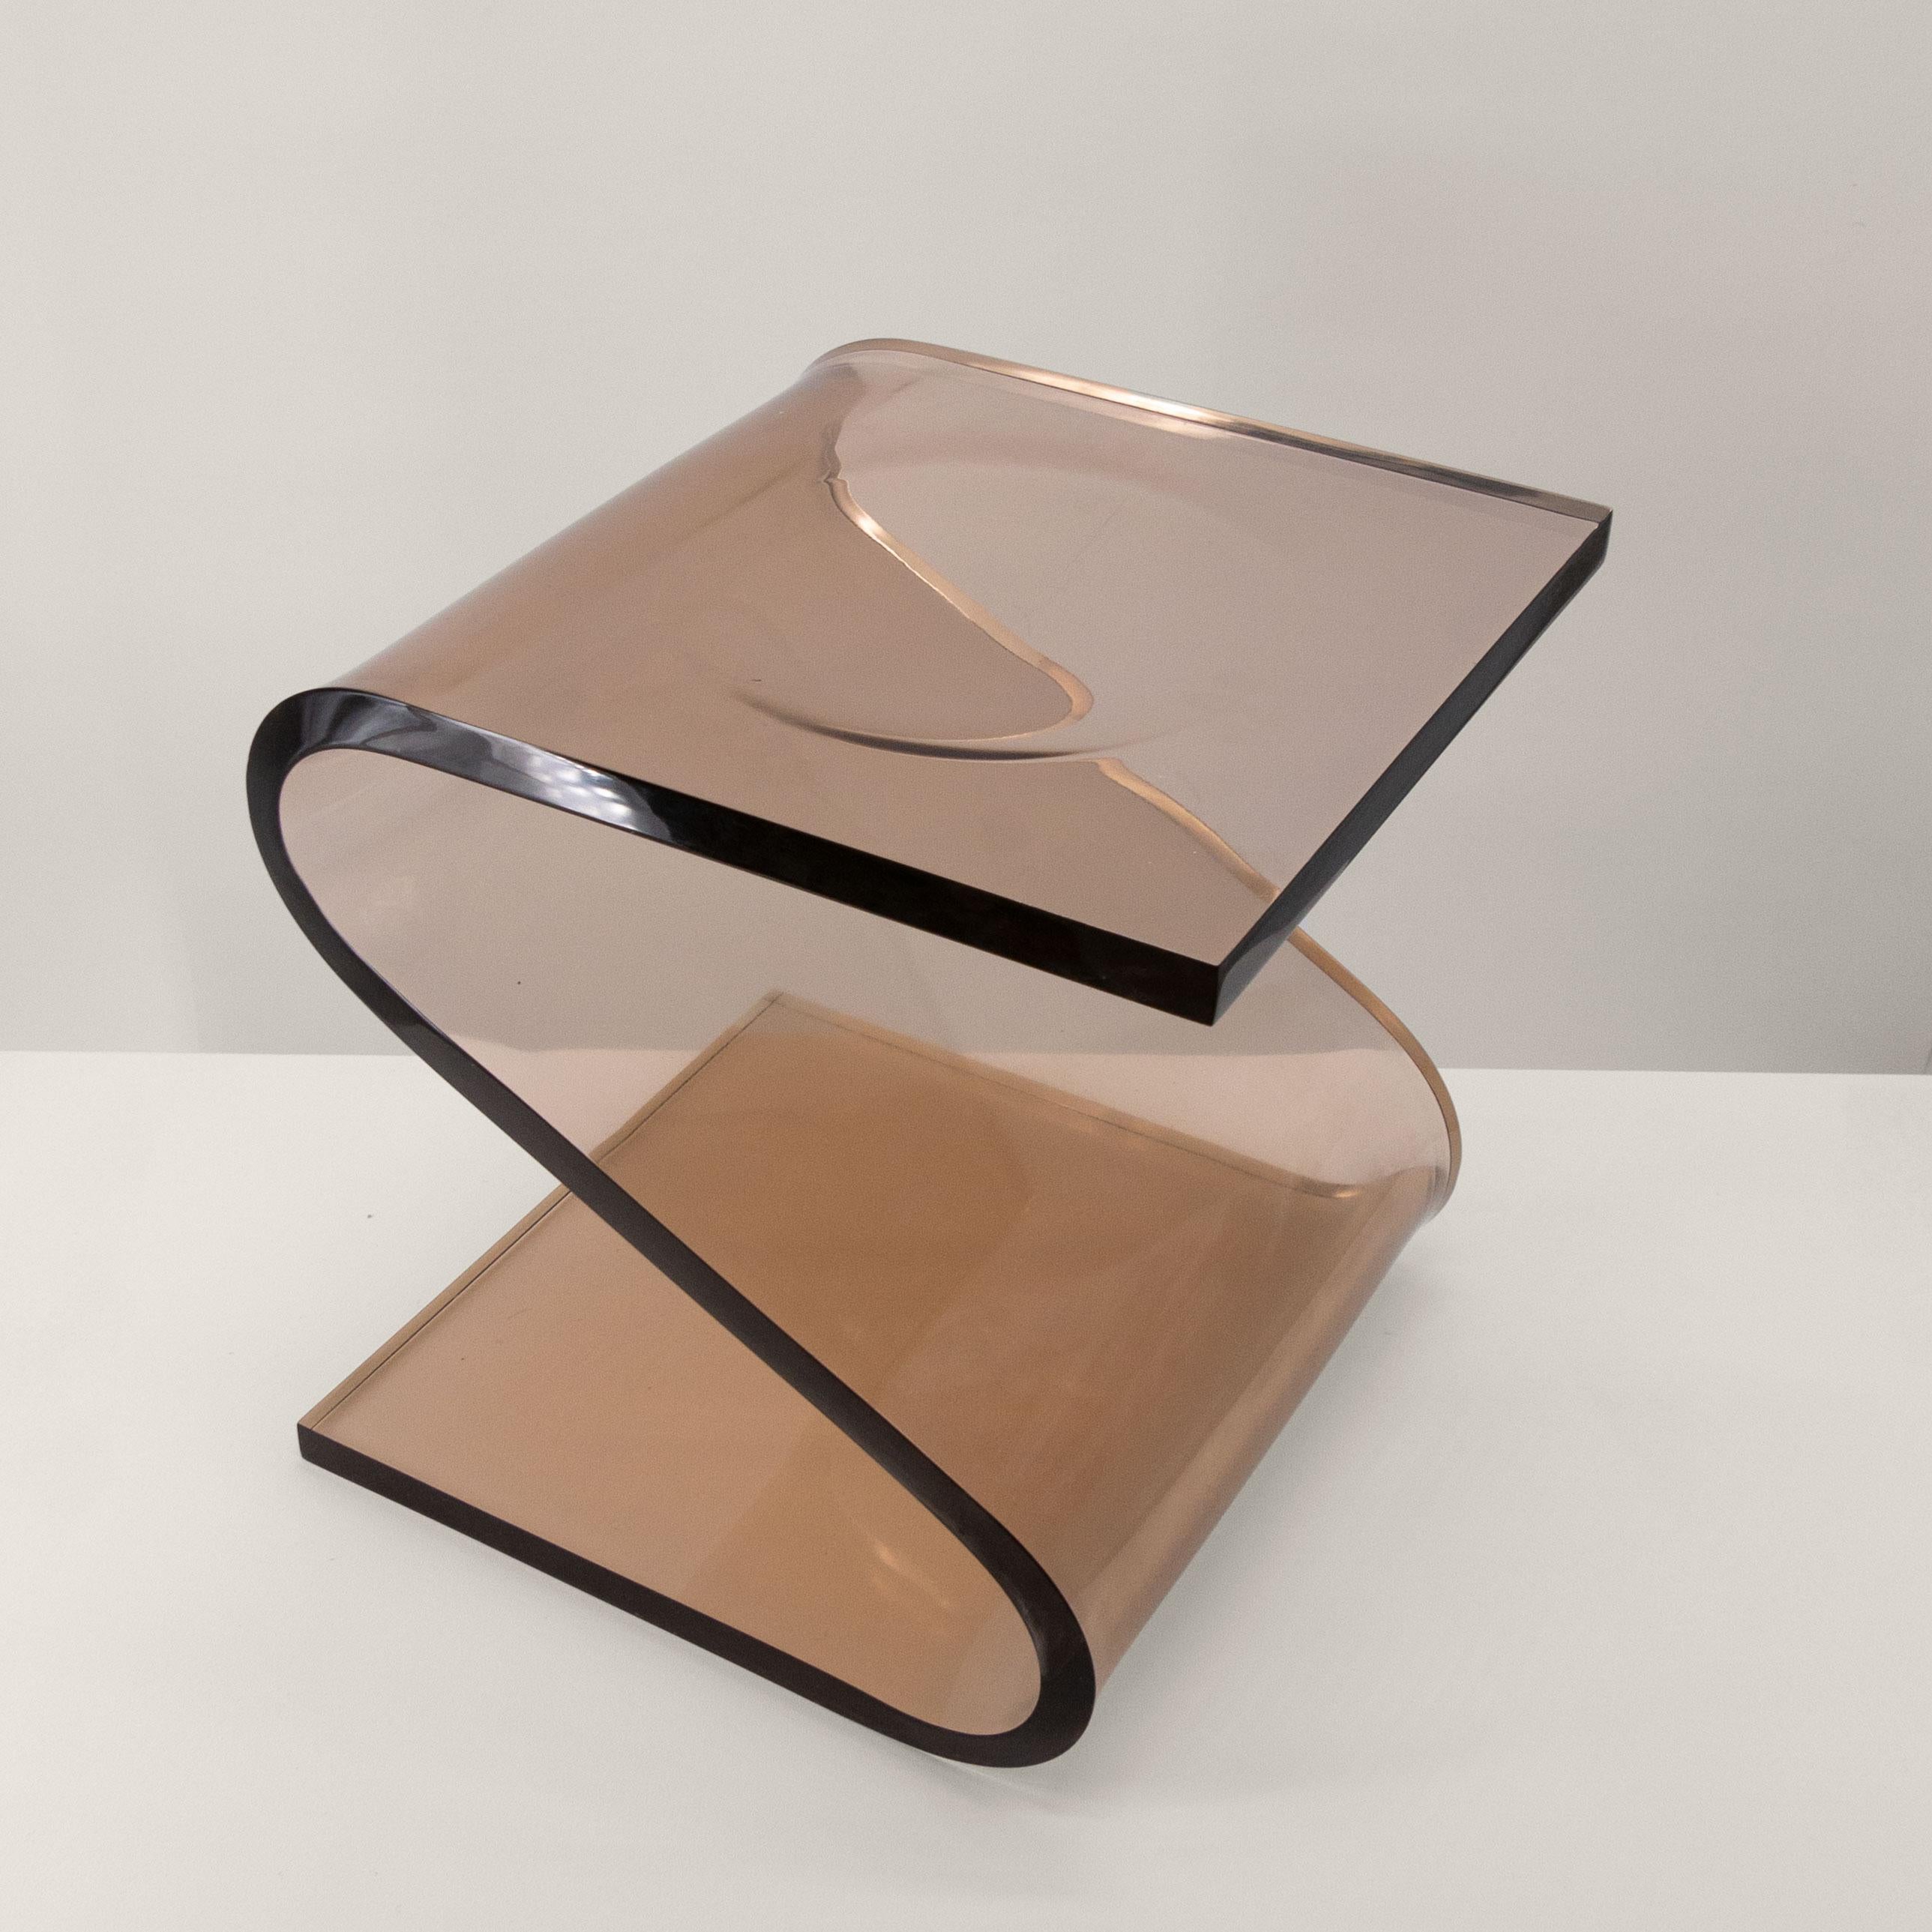 The Z Stool by François Arnal was created in 1970, it is made of folded smoked polymethylmethacrylate. This material, more commonly known as Plexiglas, allows the creation of lines of great fluidity while maintaining sufficient rigidity to serve as